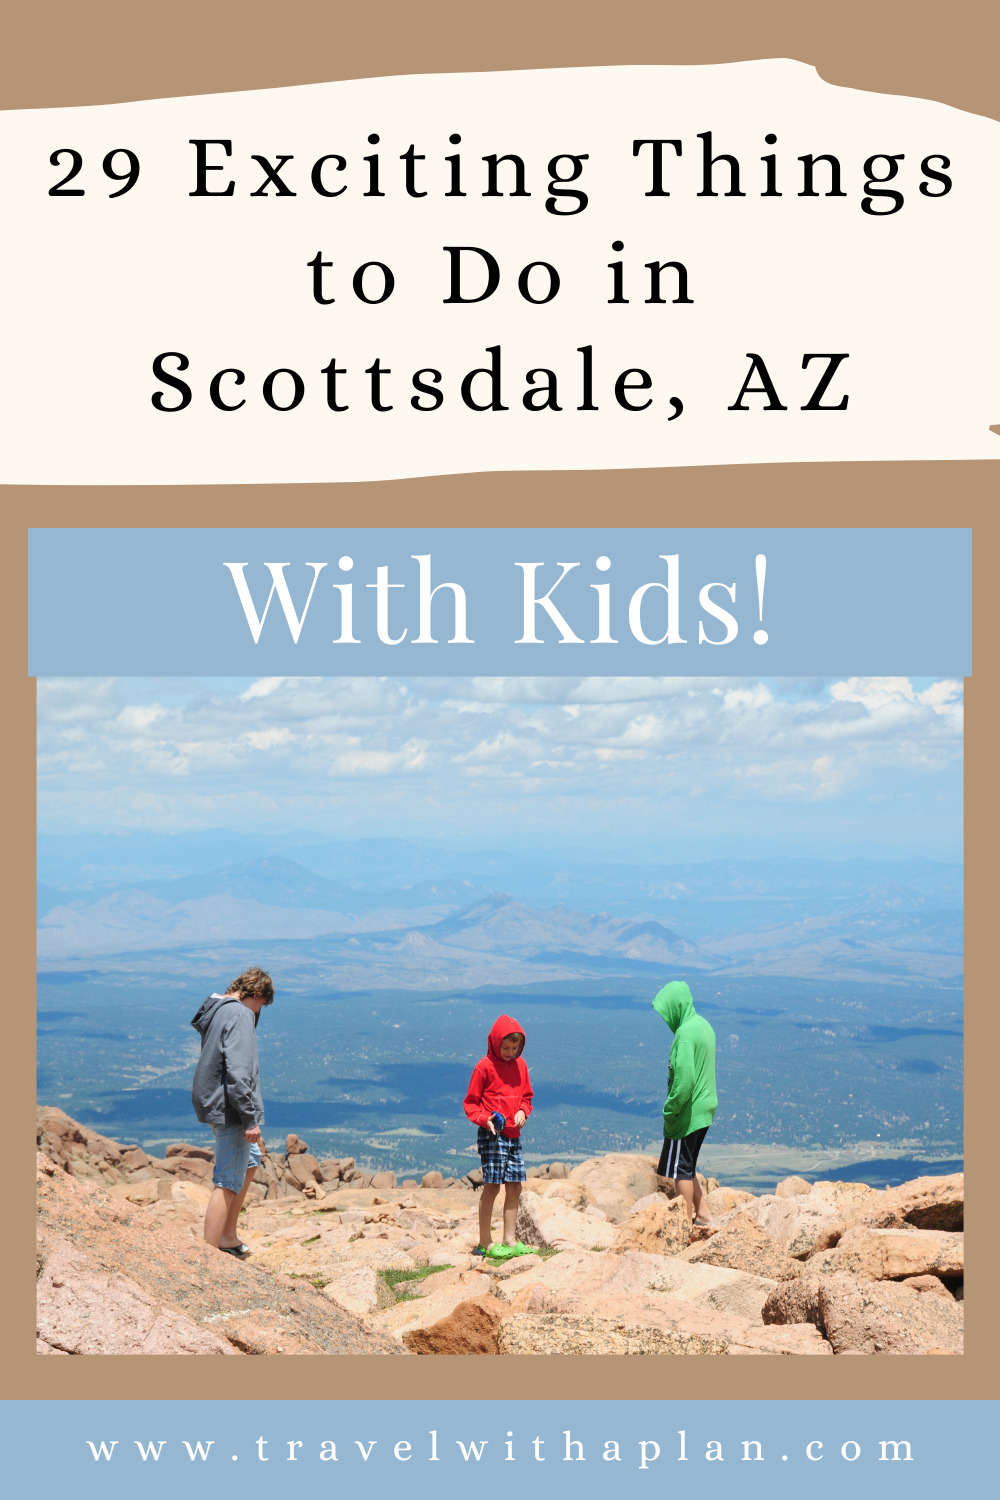 Here's our list of the best things to do in Scottsdale with kids from top US family travel blog, Travel With A Plan!